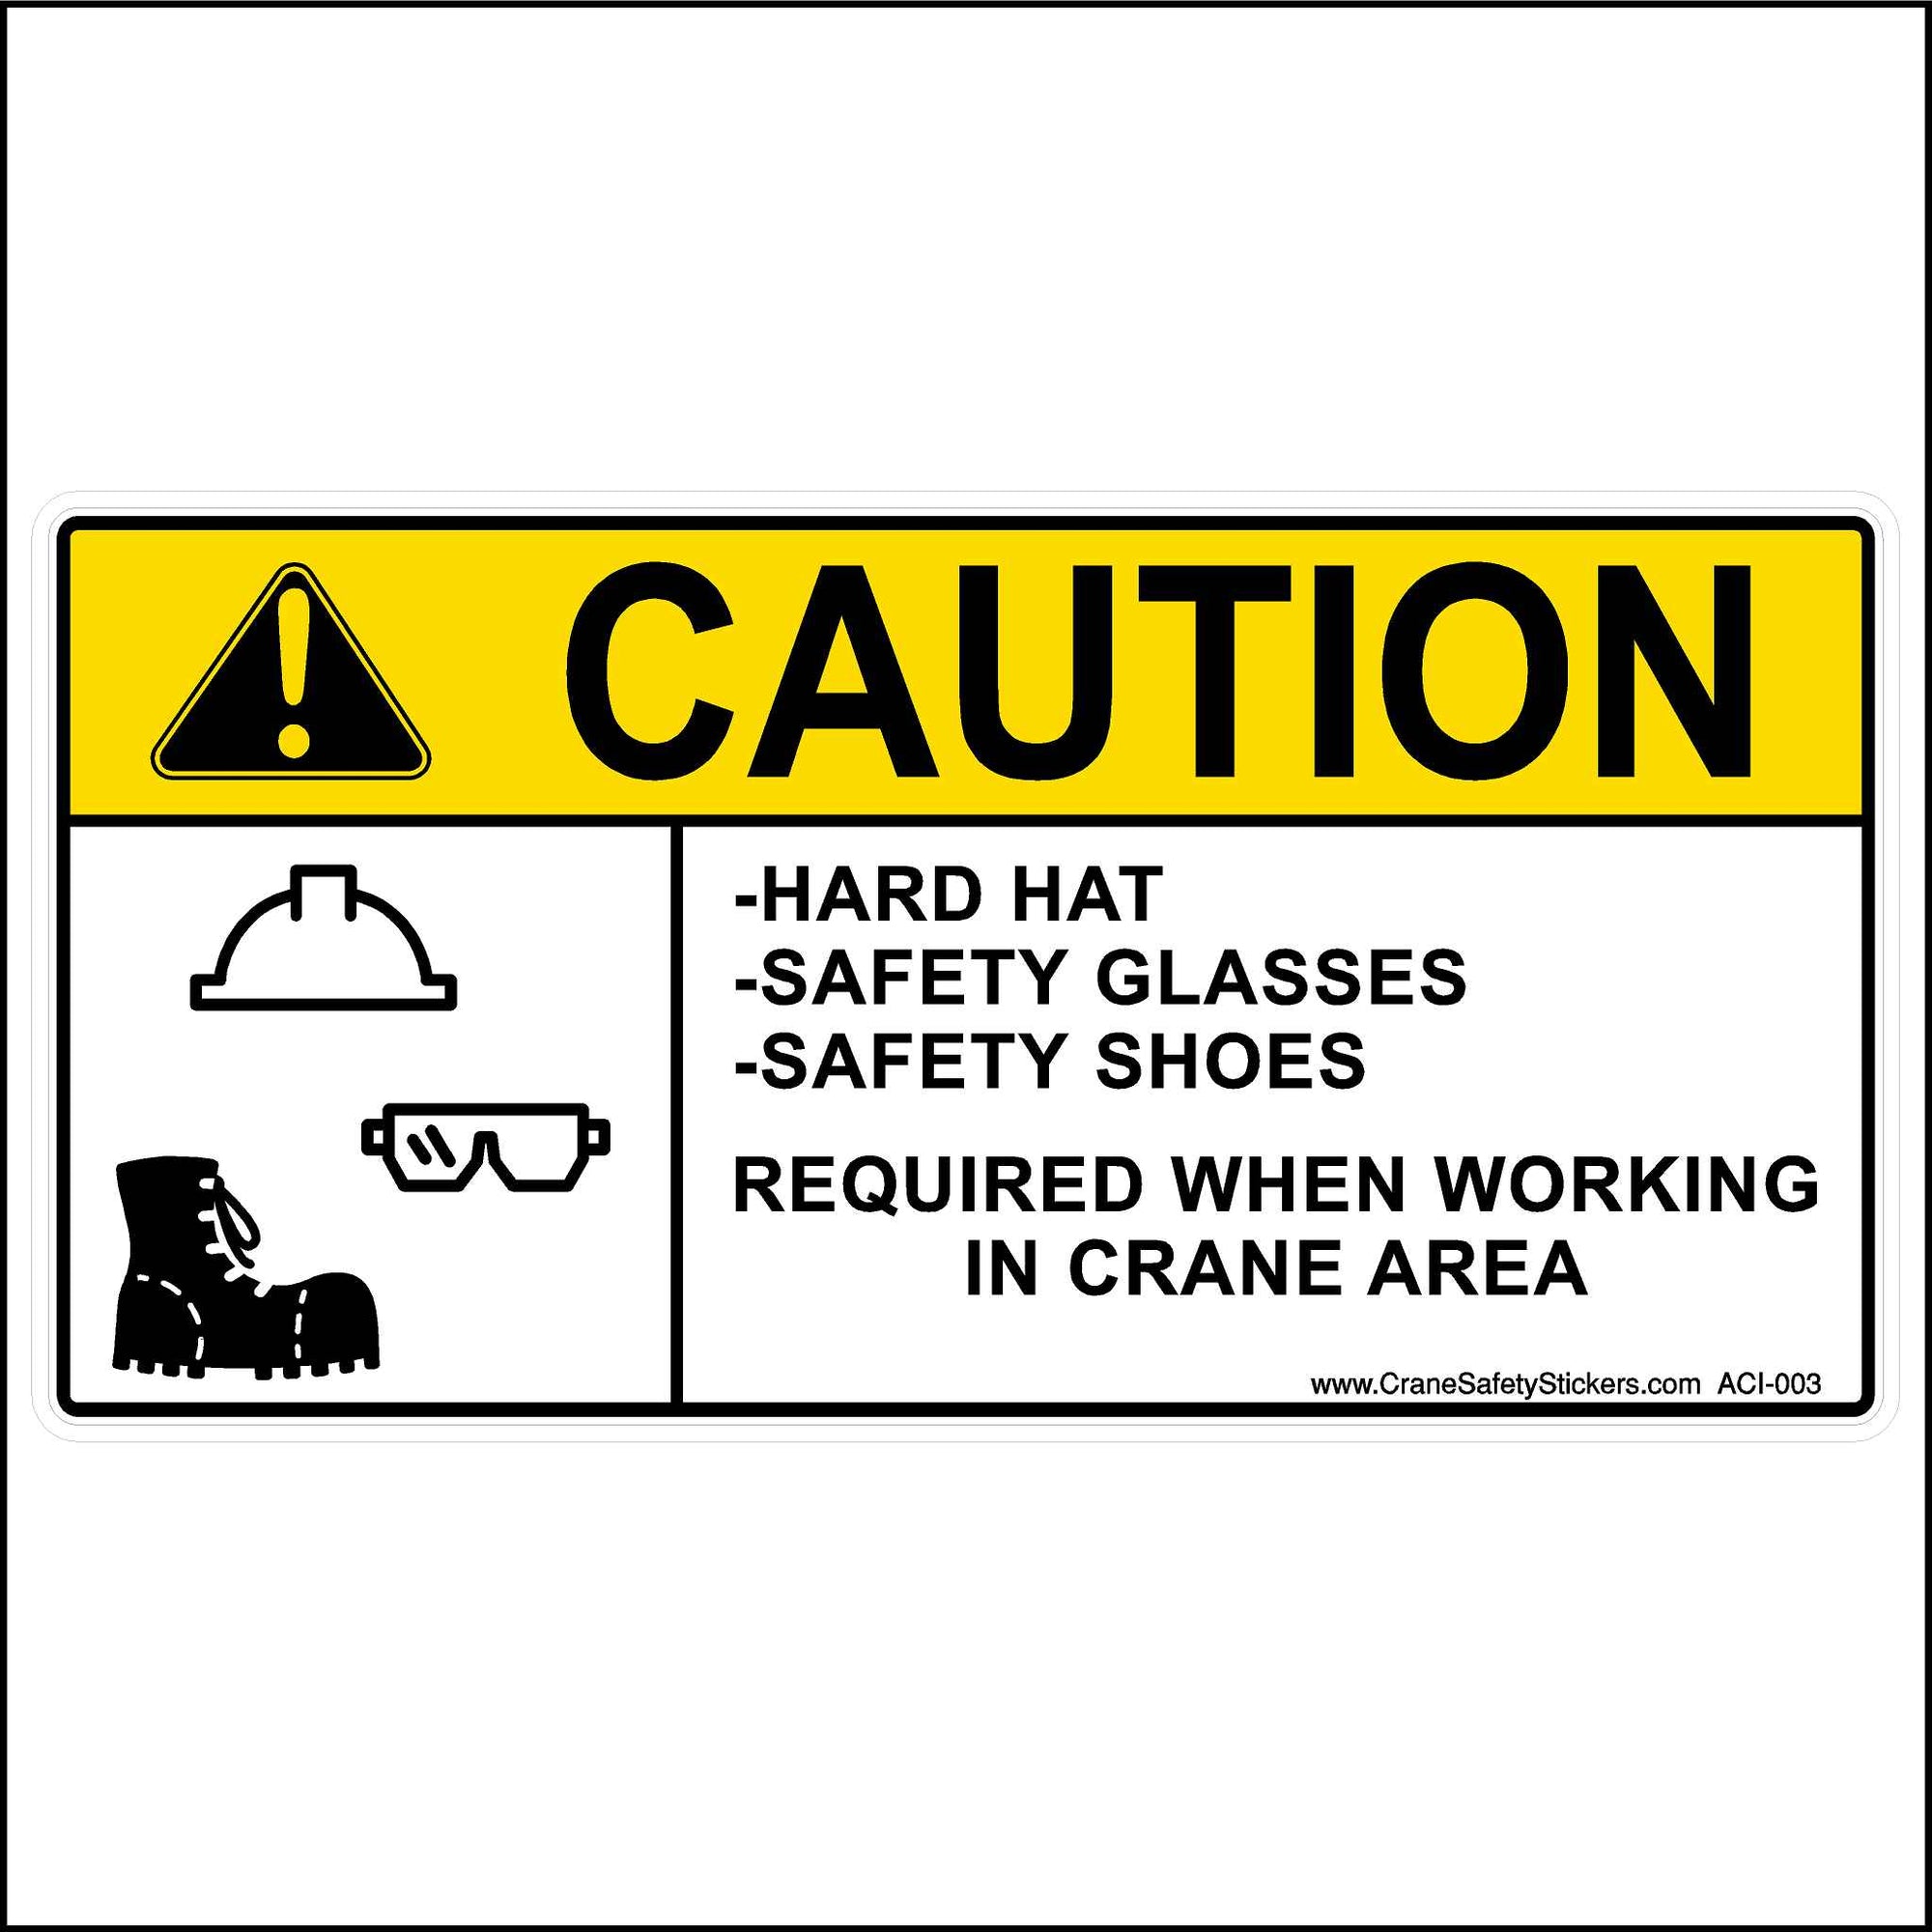 Caution Sign printed with, Caution Hard Hat Safety Glasses Safety Shoes Required When Working In Crane Area.